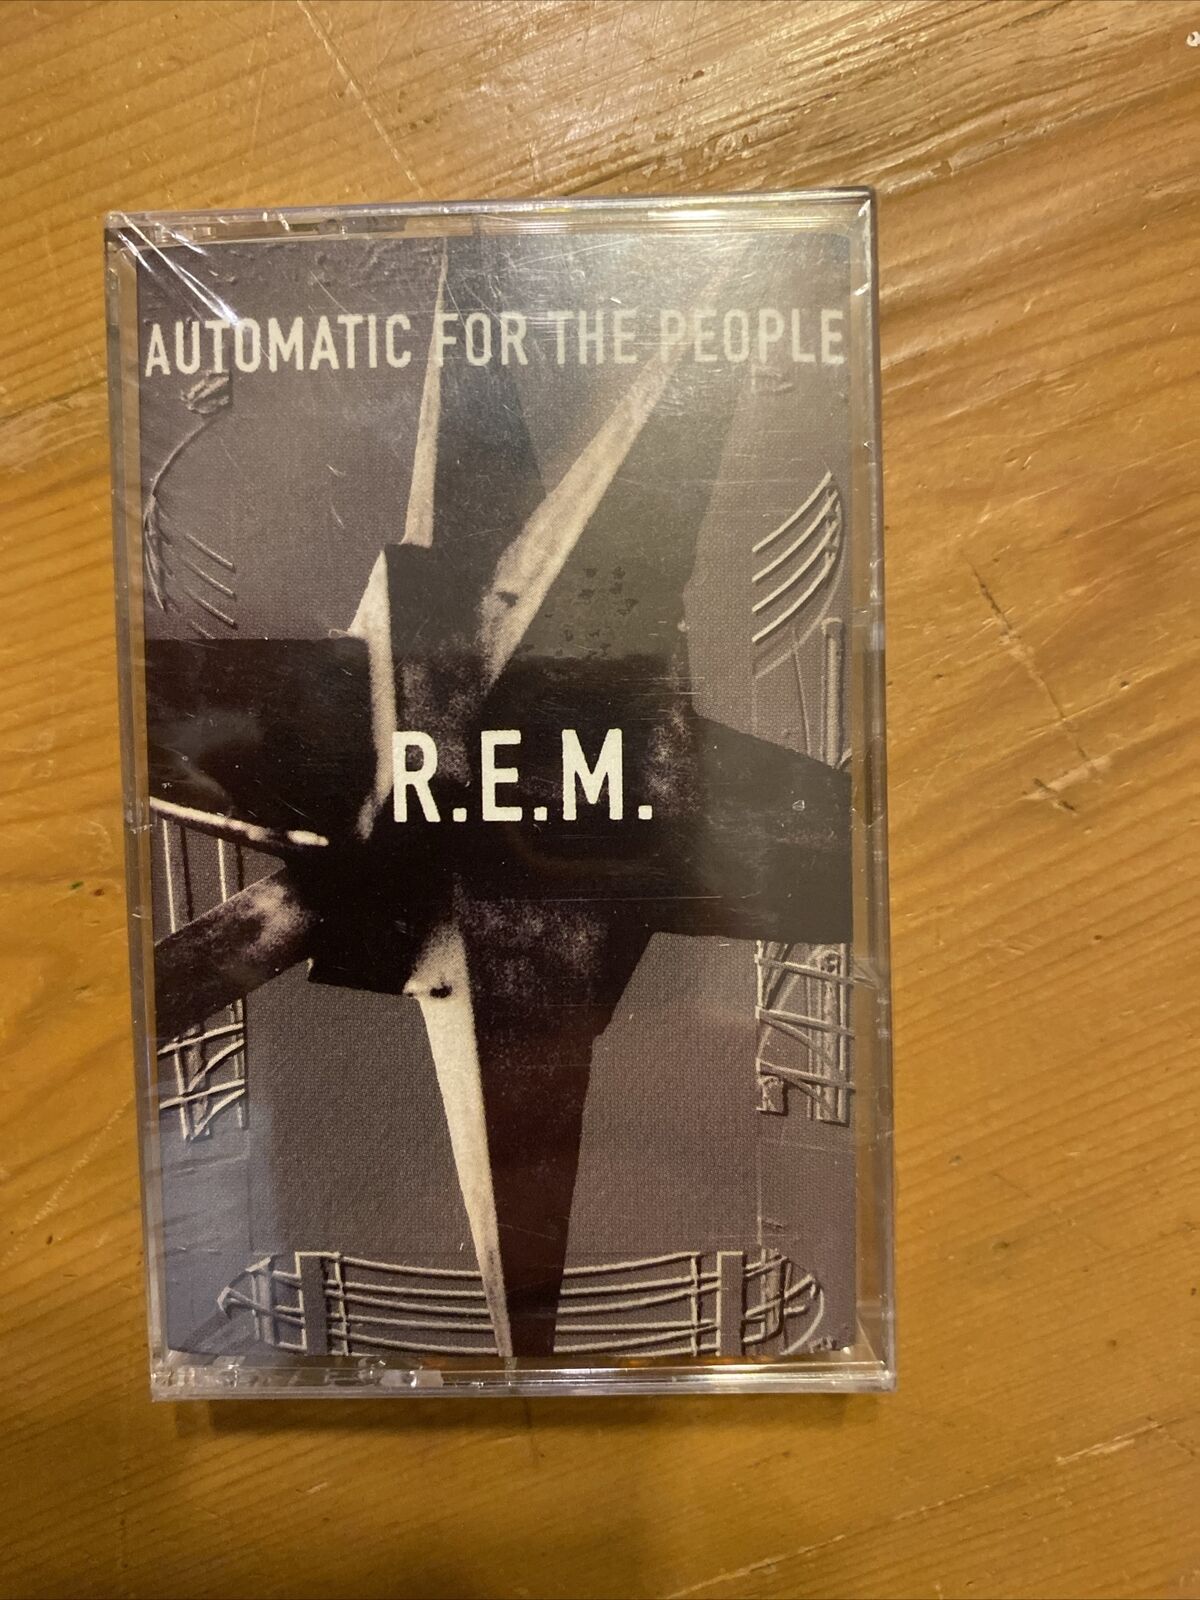 R.E.M. REM Automatic for the People Cassette tape (New Sealed)